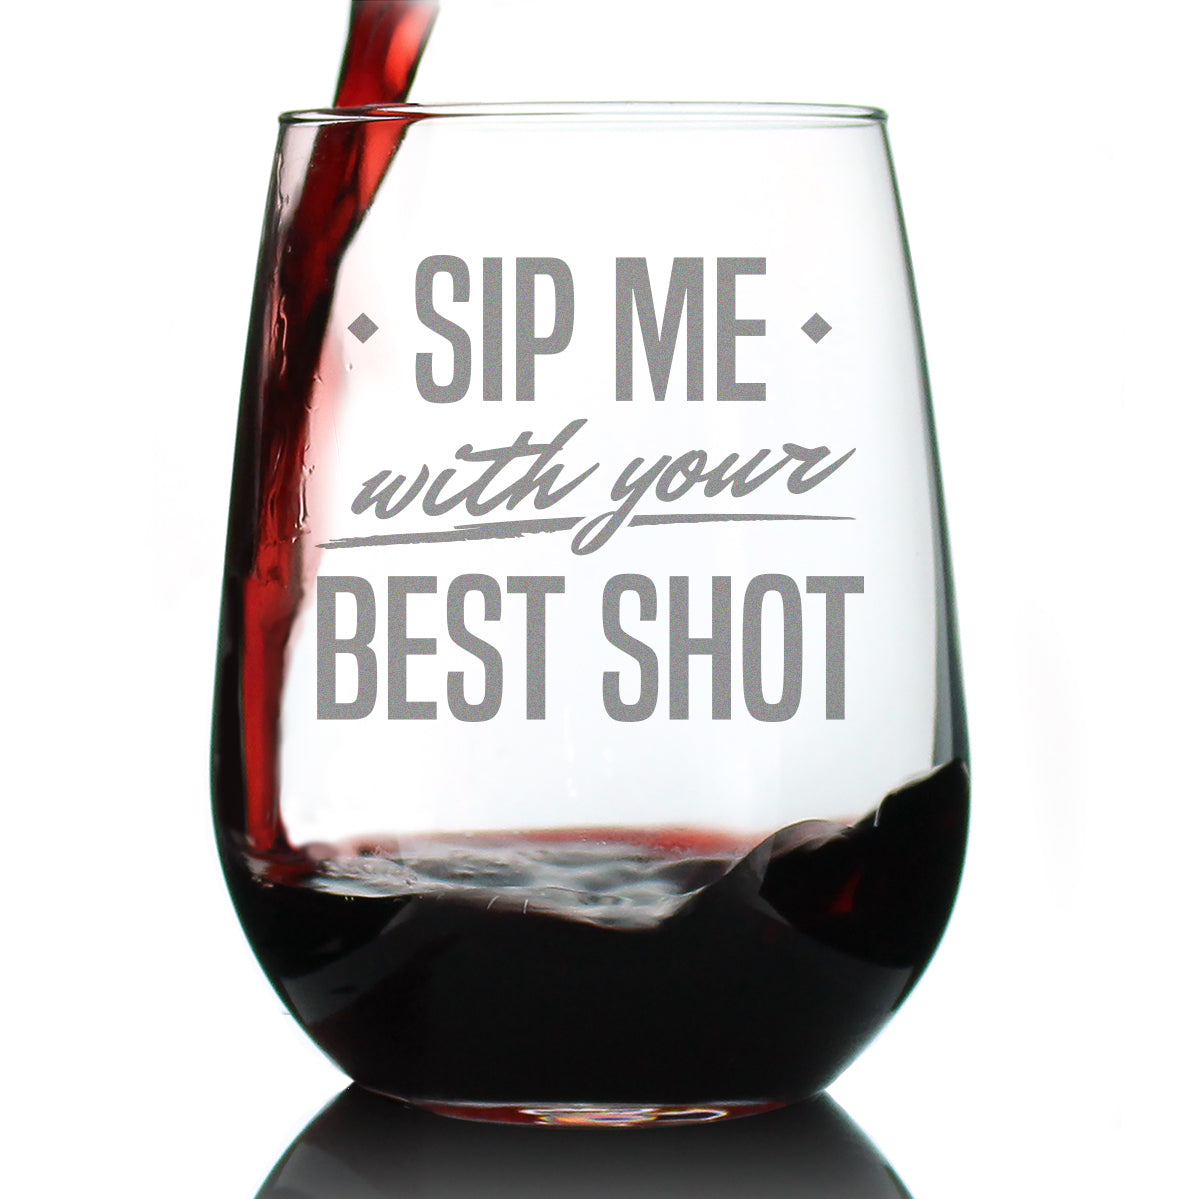 Sip Me With Your Best Shot – Cute Funny Wine Glass, Large 16.5 Ounce Size, Etched Sayings, Gift Box